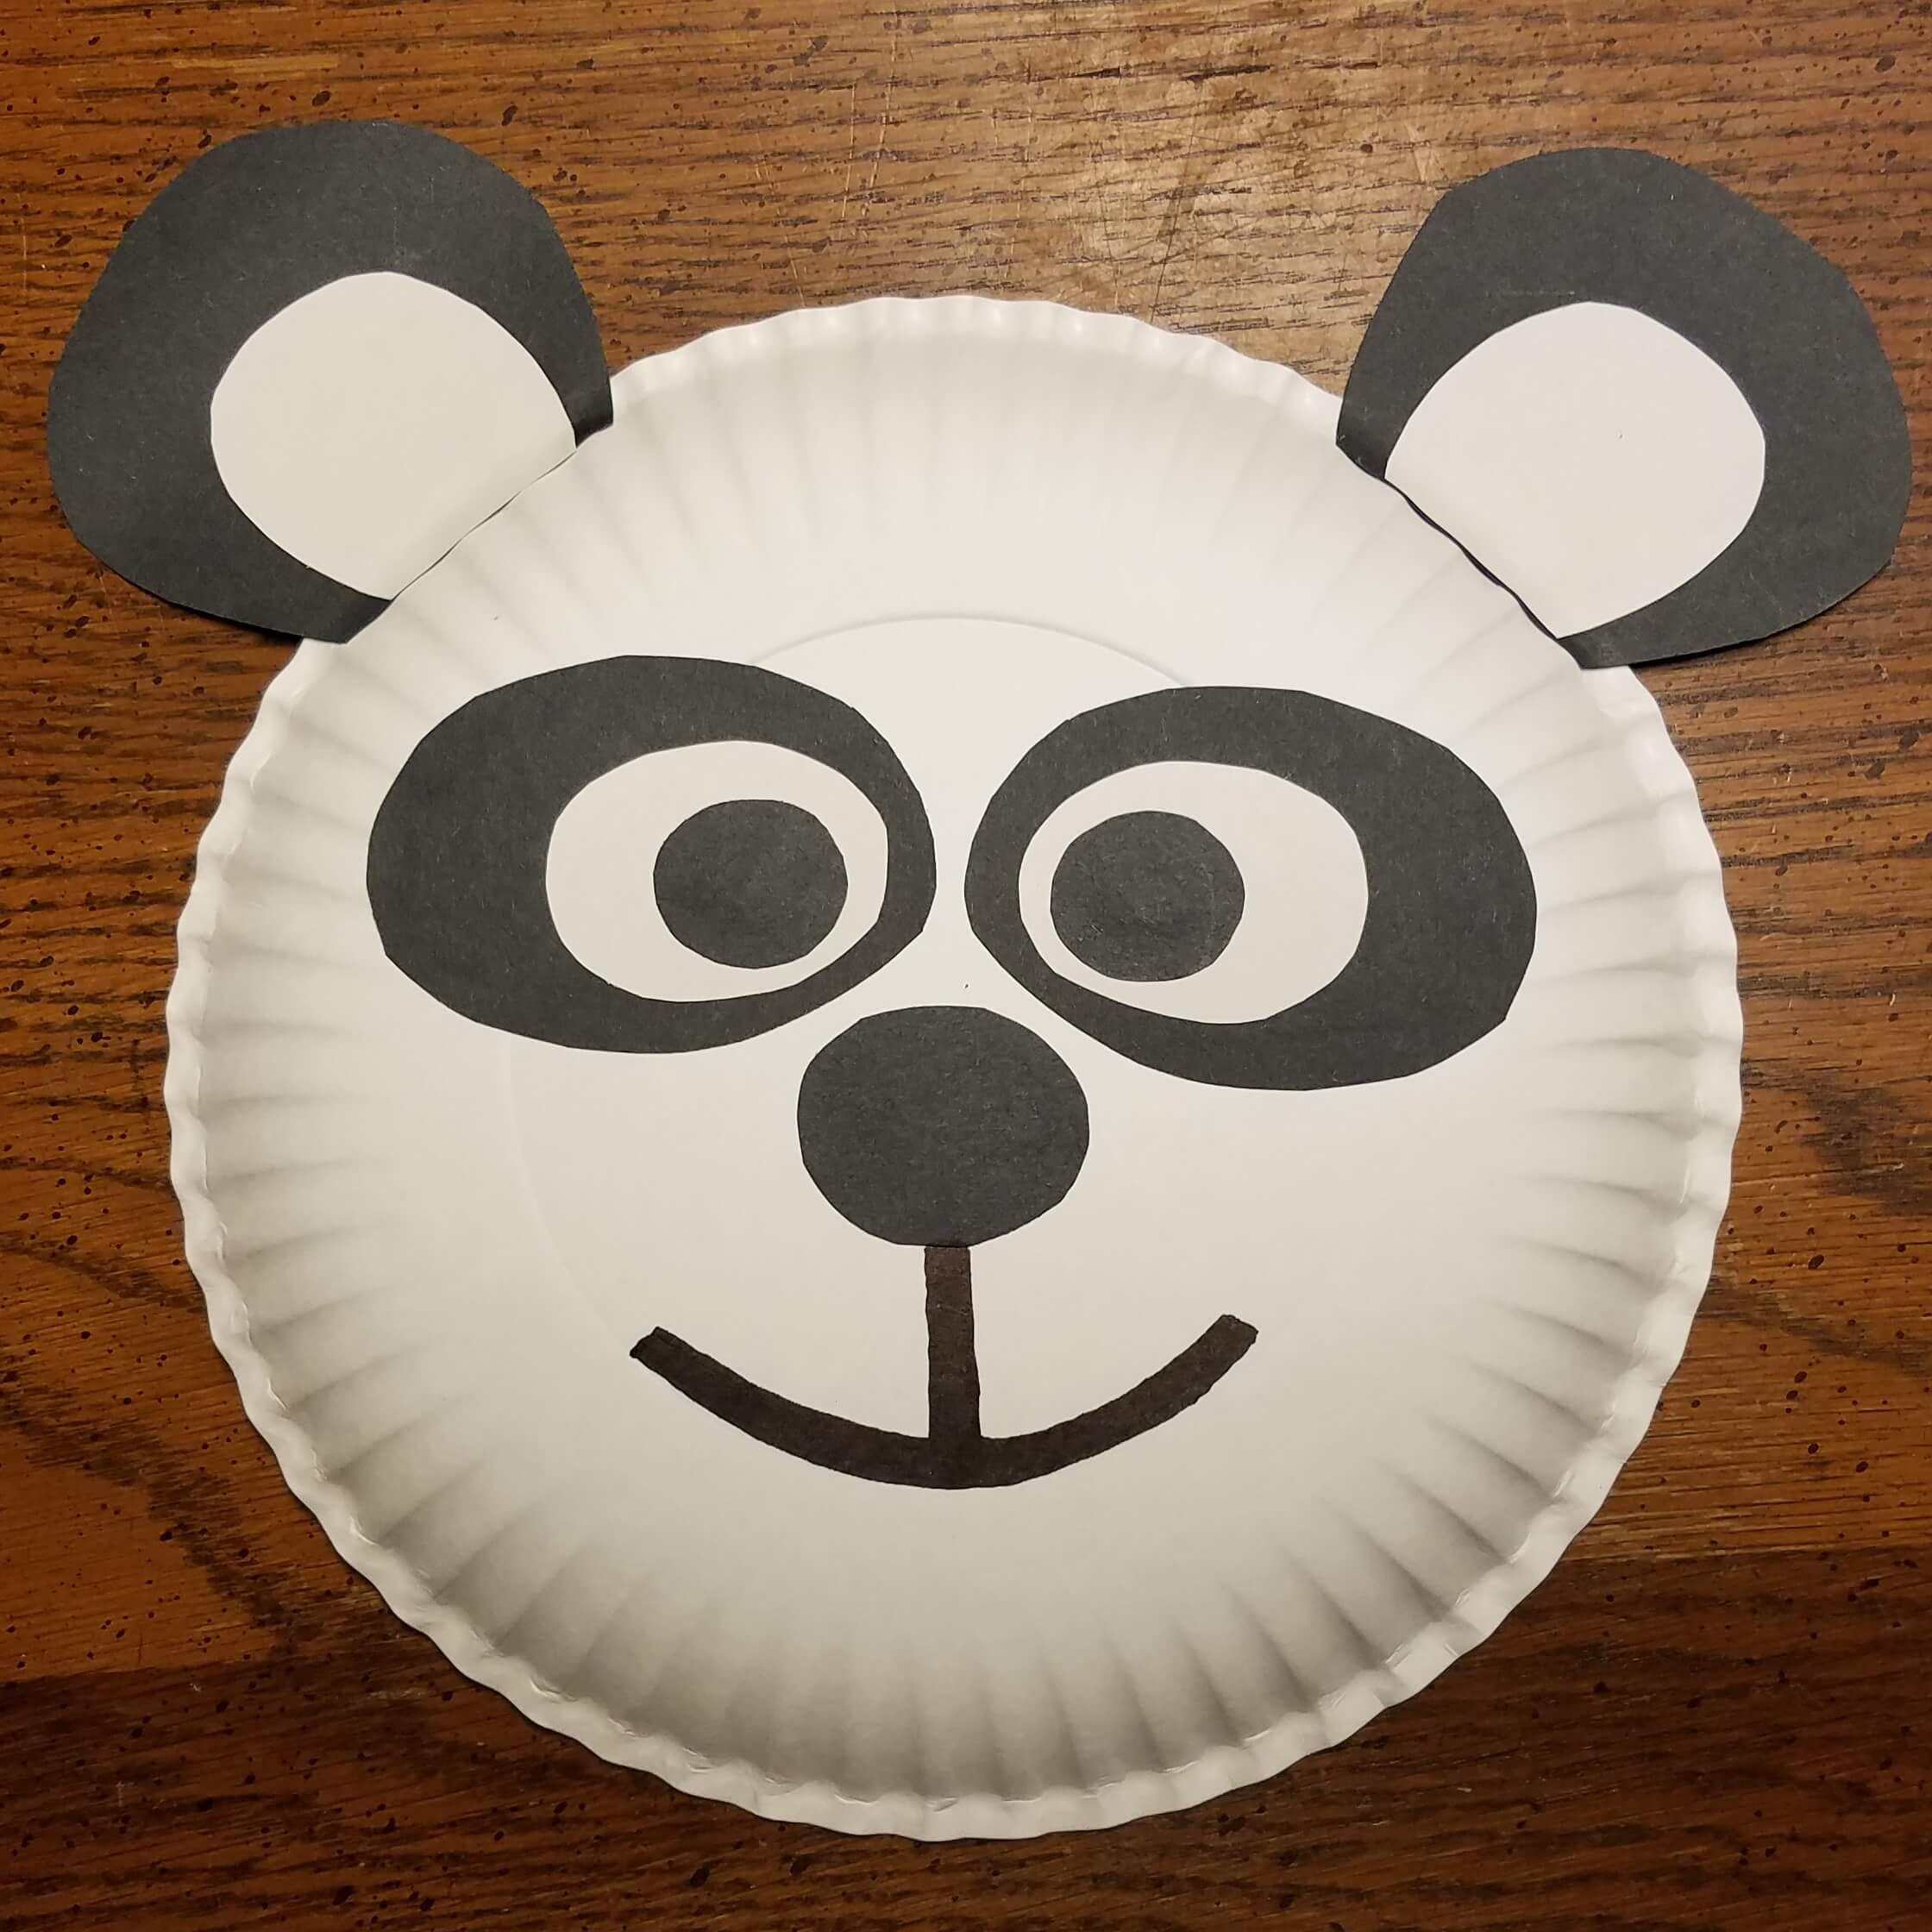 Simple Panda Craft With Paper Plate